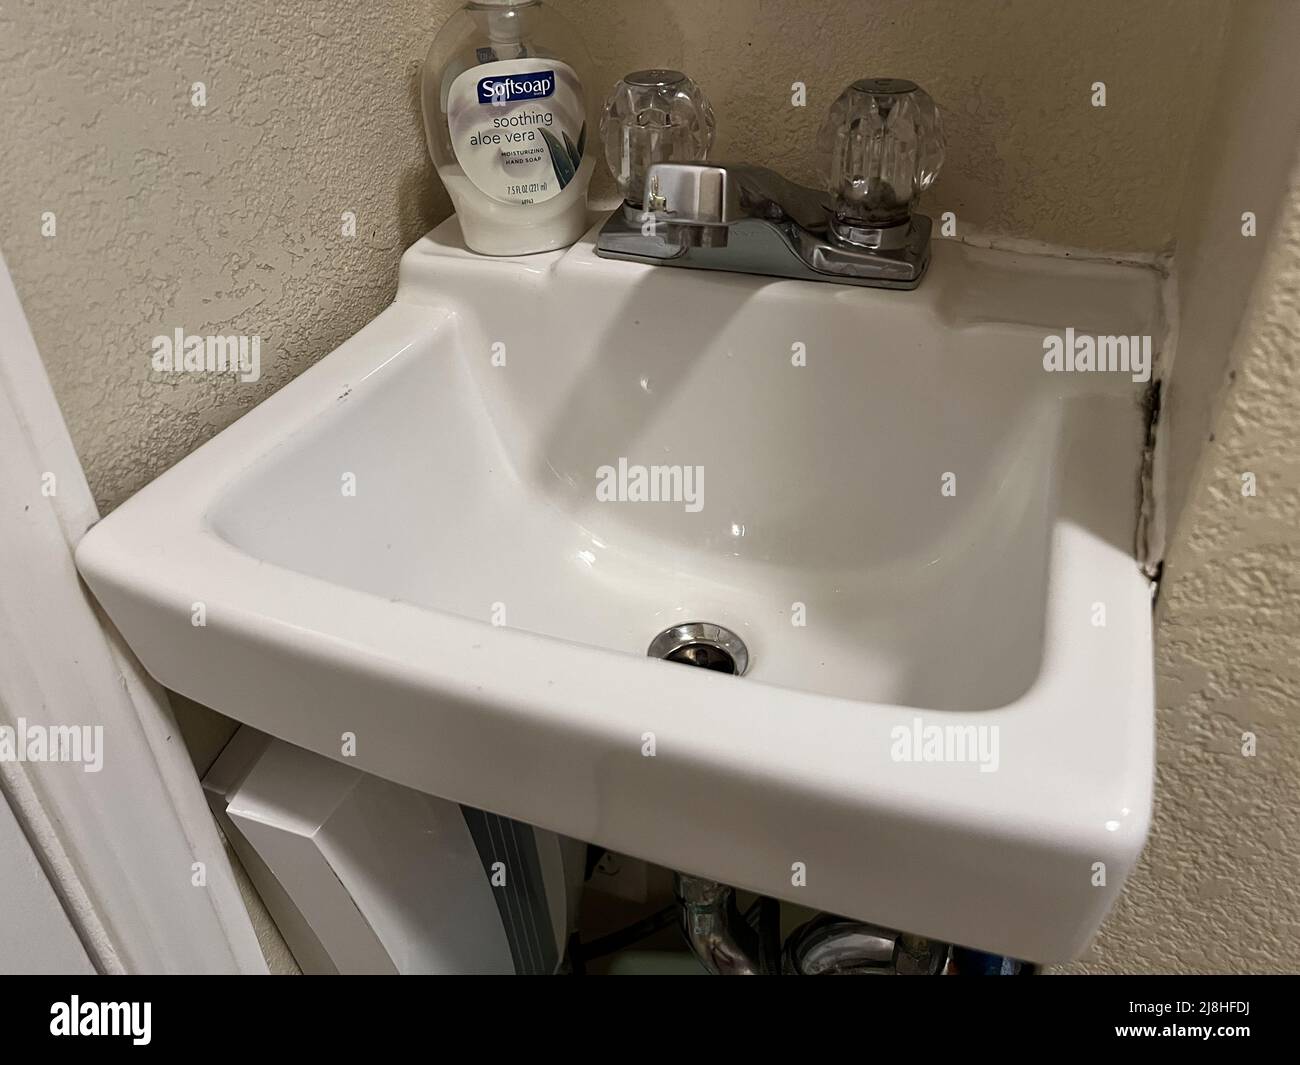 A small sink is visible in a closet converted to a bathroom, Lafayette, California, March 4, 2022. Stock Photo